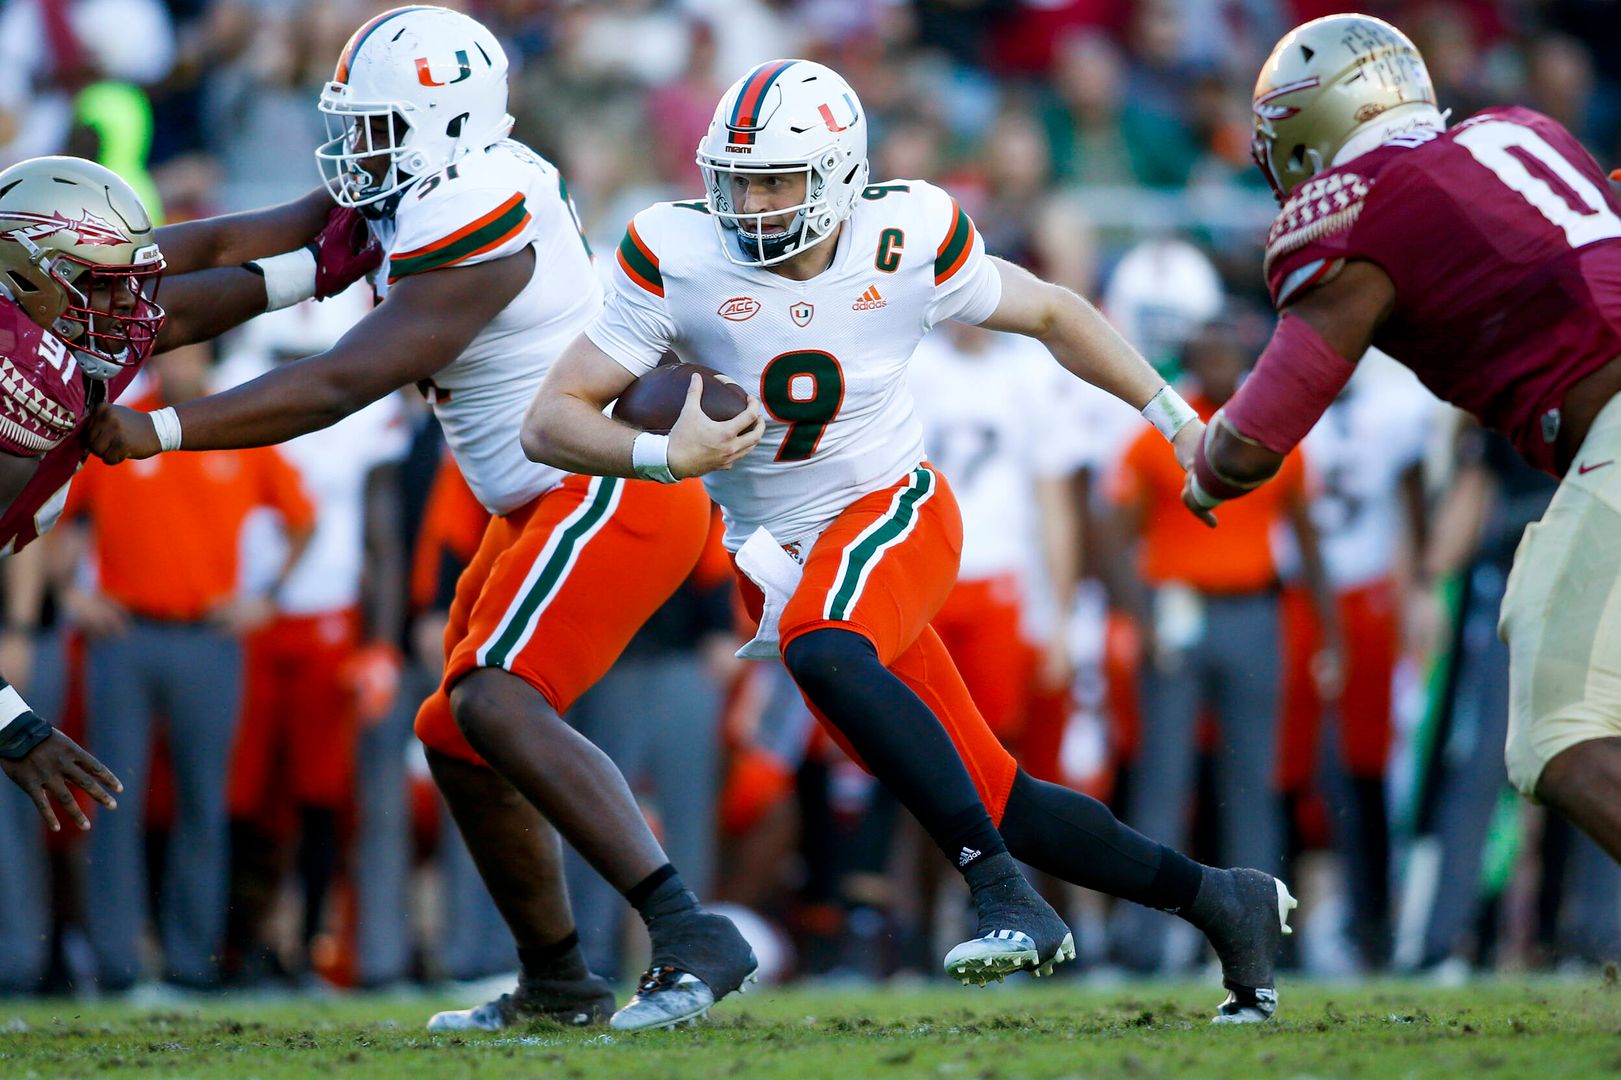 Takeways from Miami's Game at Florida State